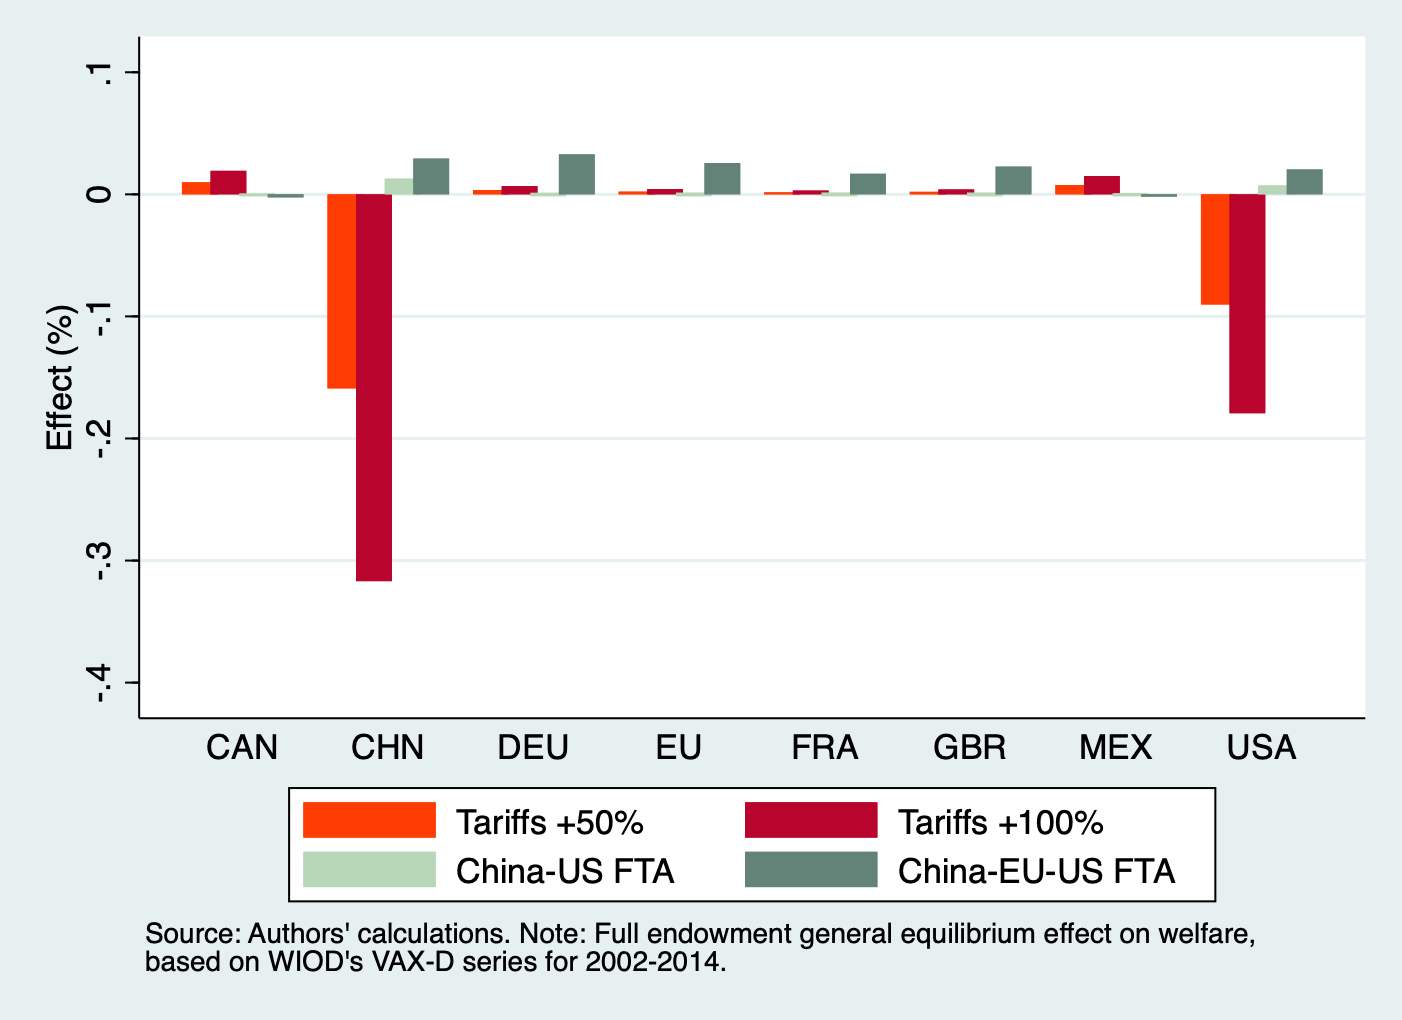 Figure 2: Welfare Effects of FTAs between China-US and China-EU-US